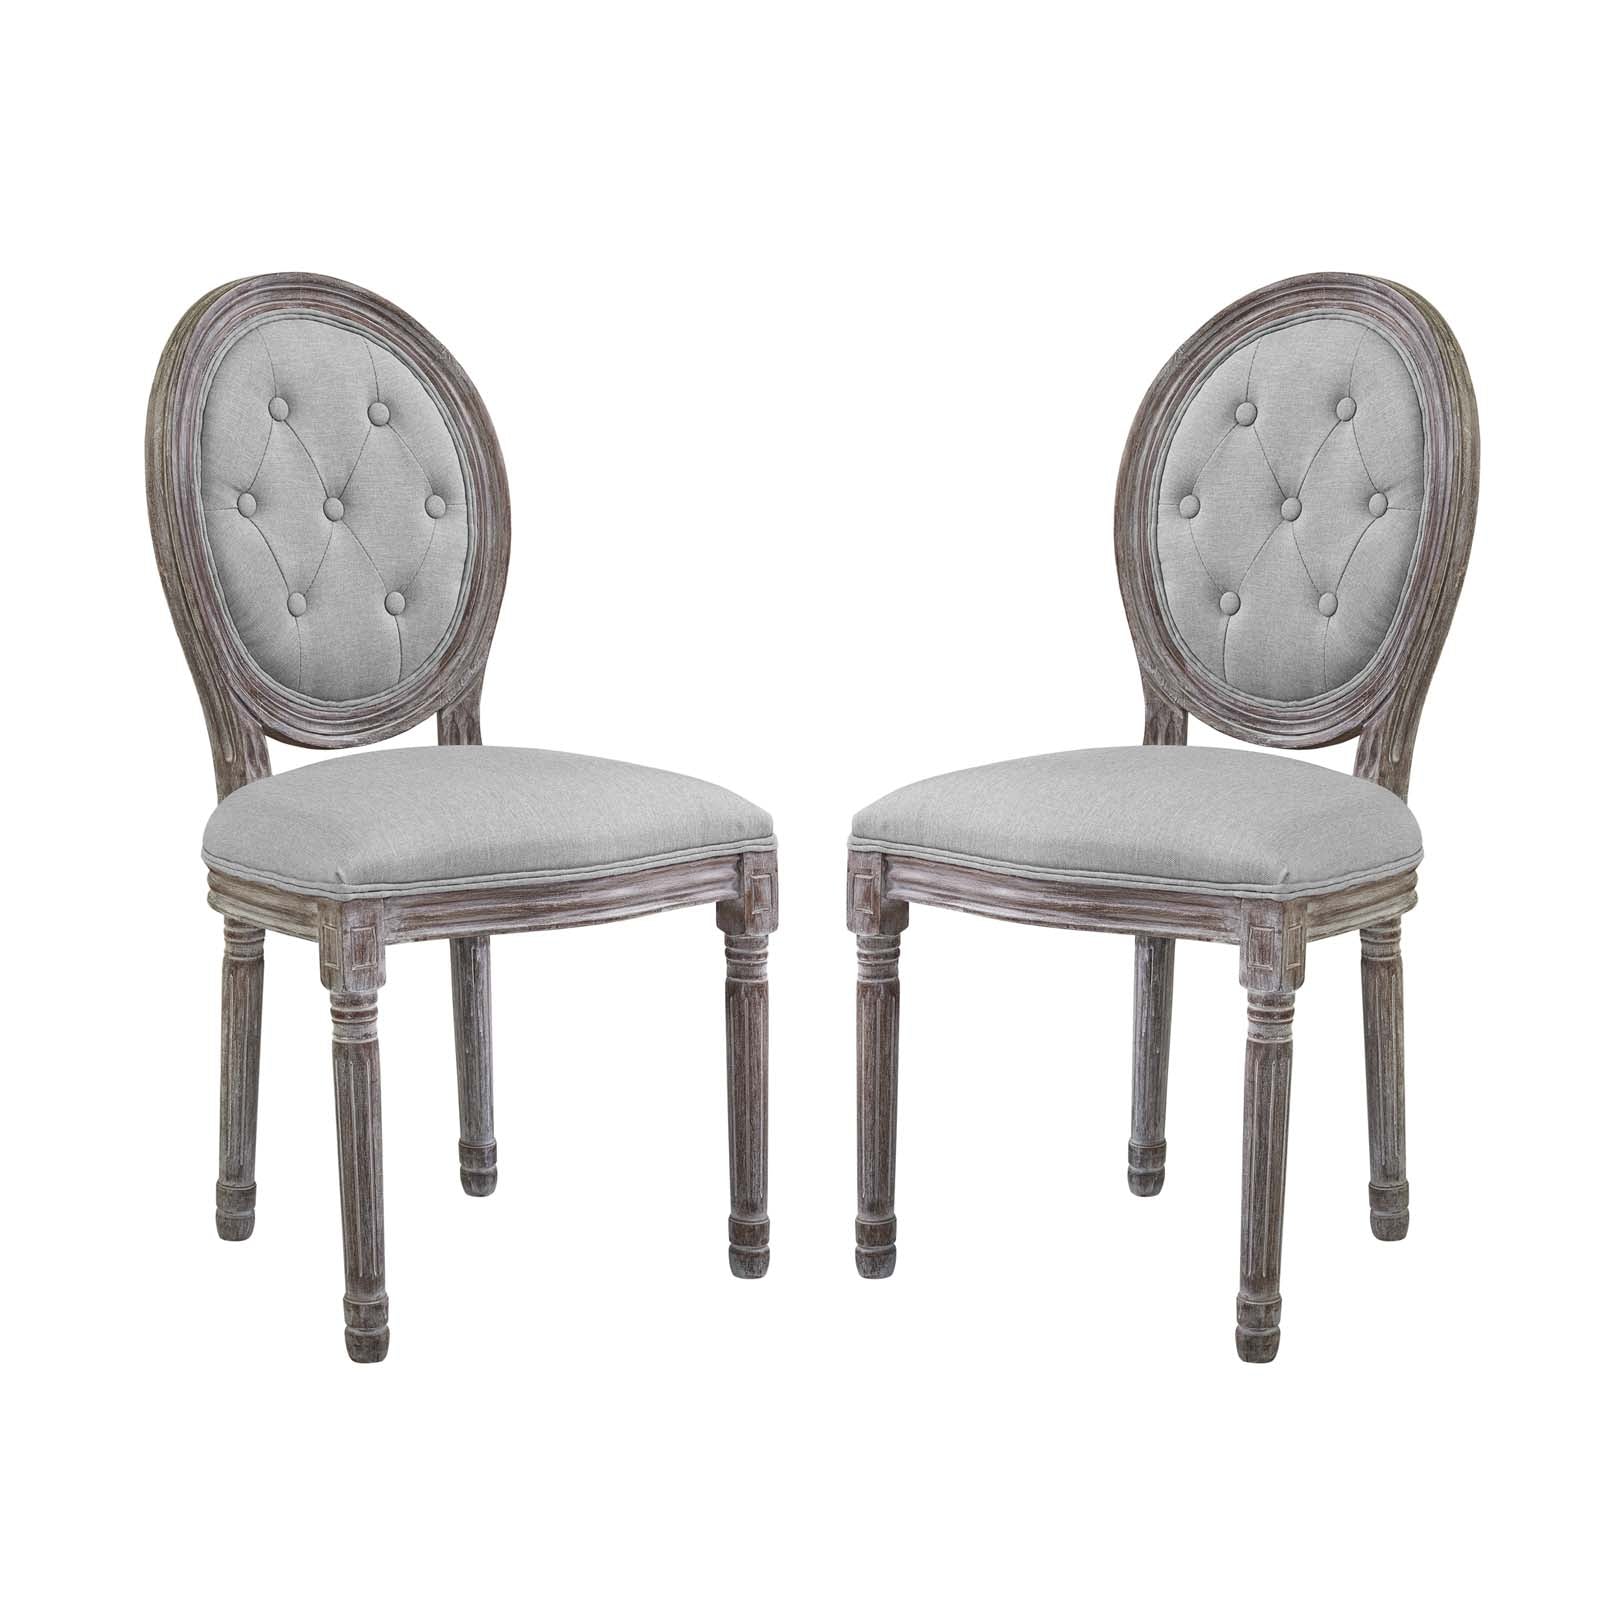 Arise Vintage French Upholstered Fabric Dining Side Chair Set of 2 - East Shore Modern Home Furnishings